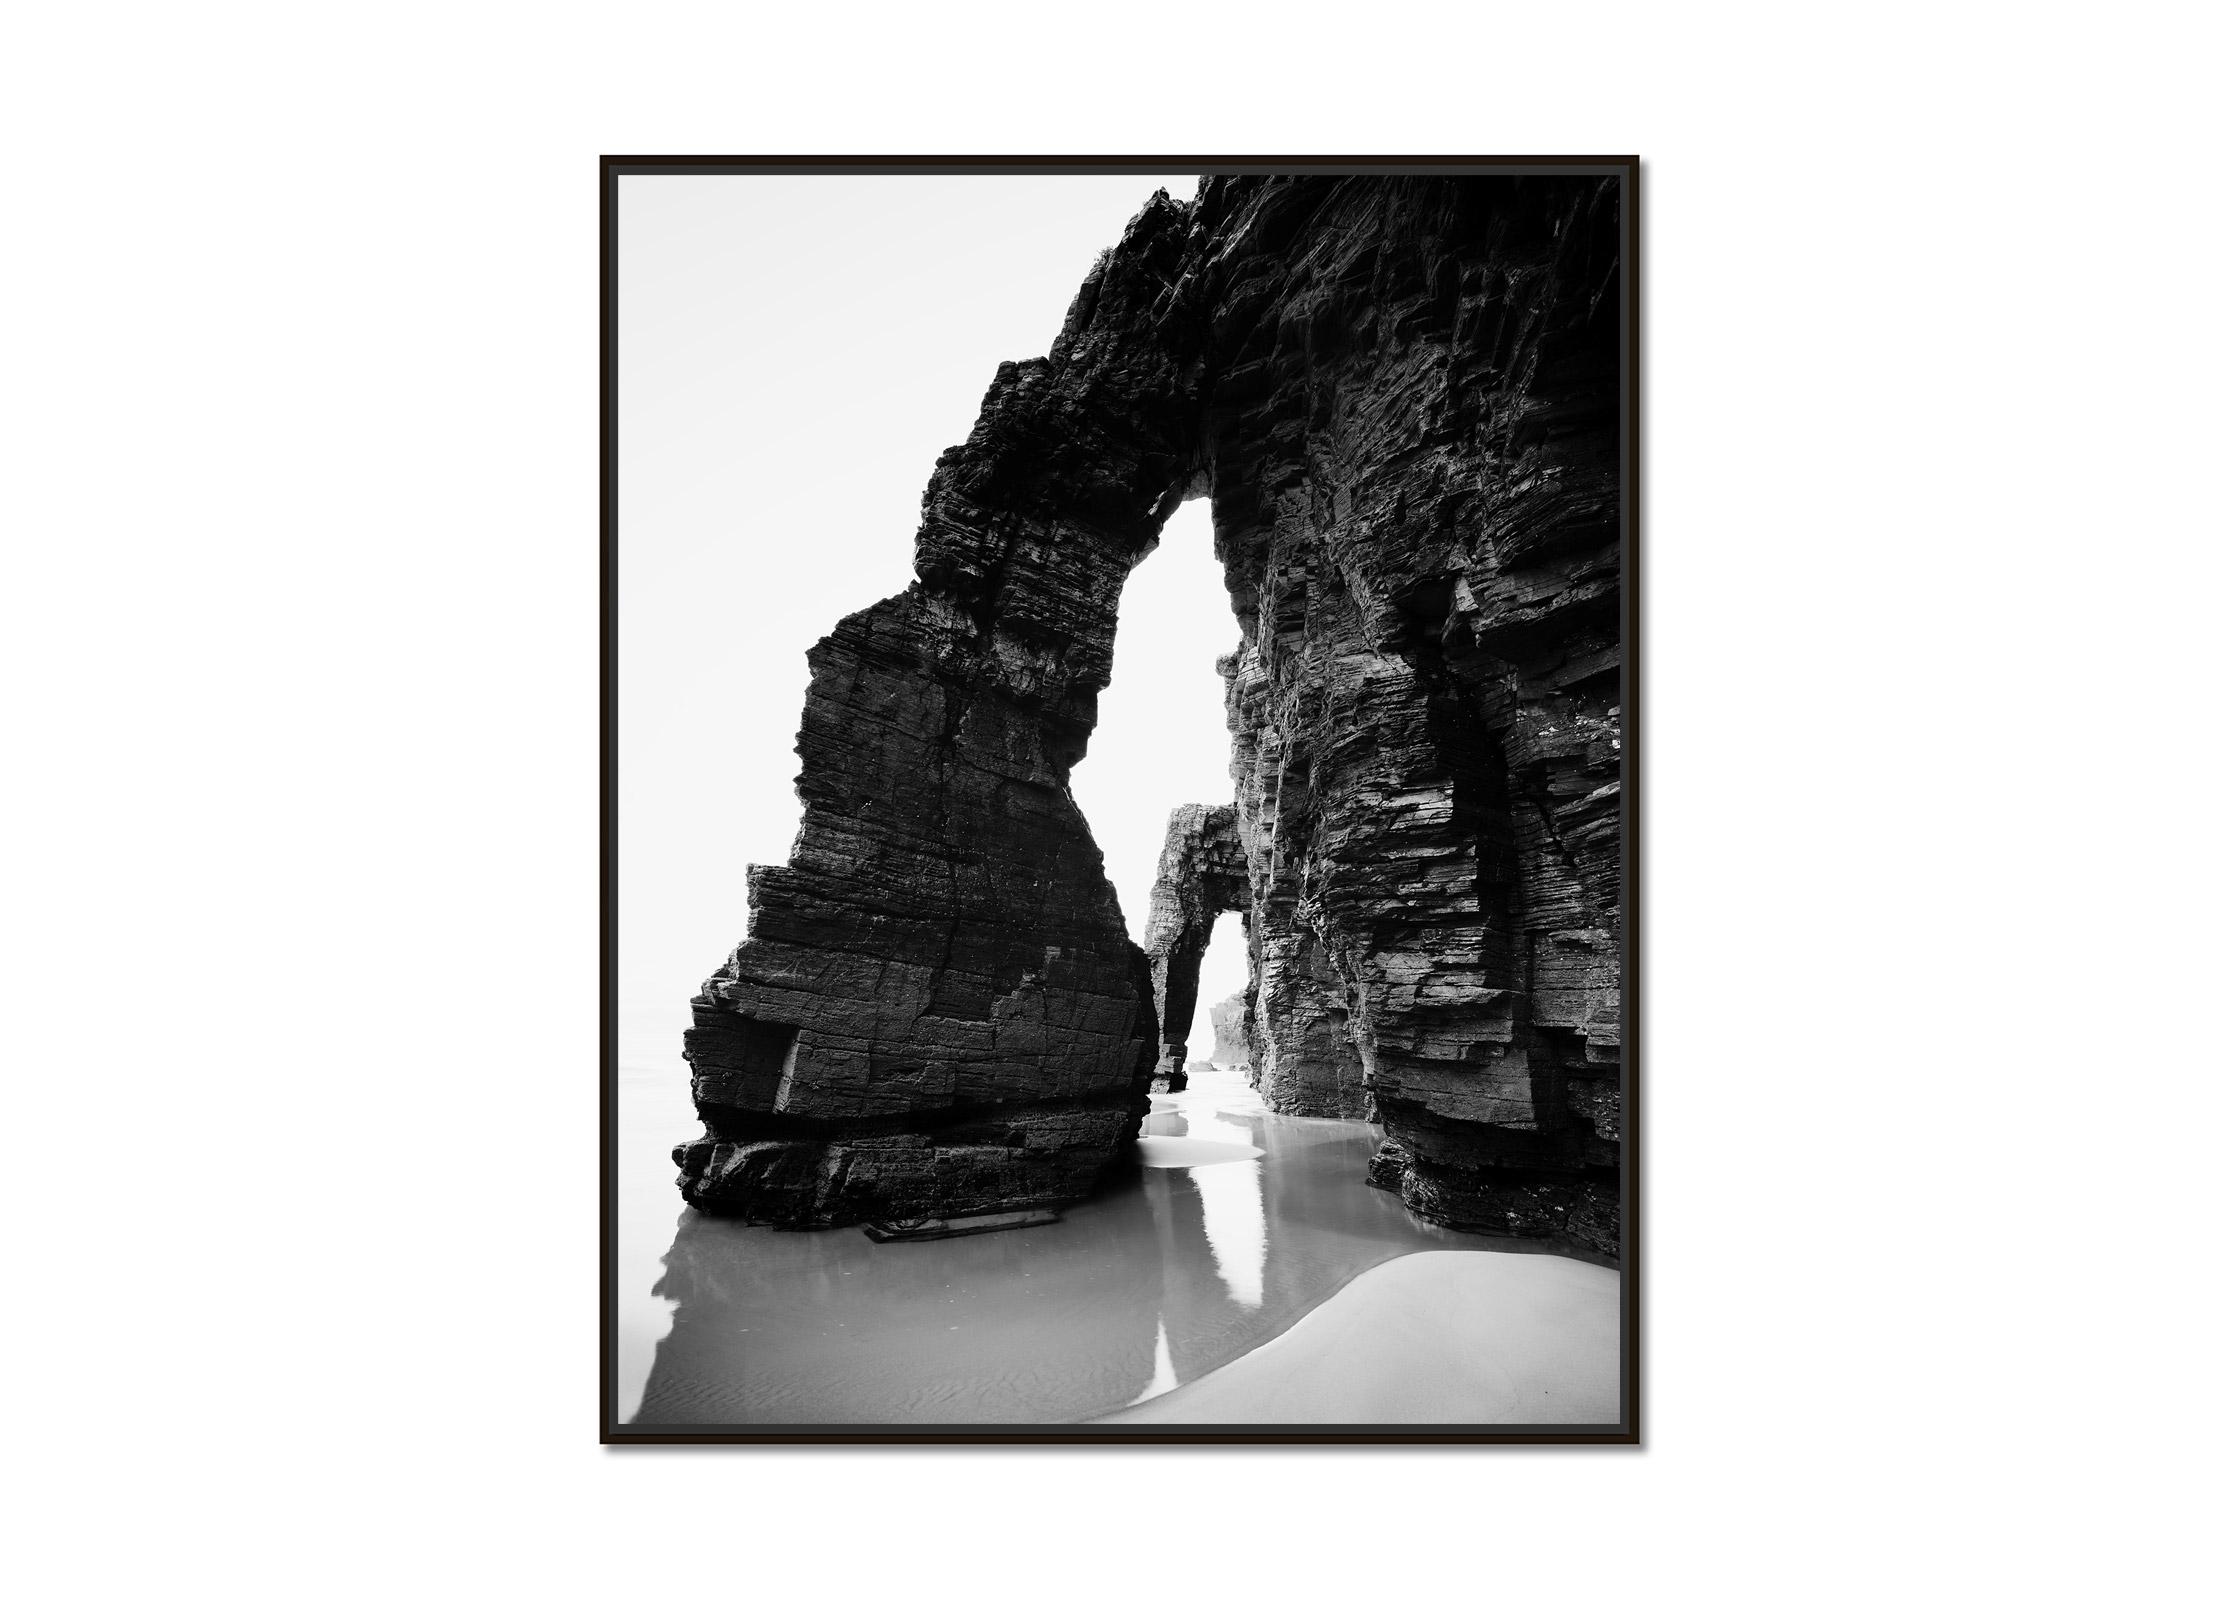 Arches, Catedrais Beach, rock formation, black and white photography, landscape - Photograph by Gerald Berghammer